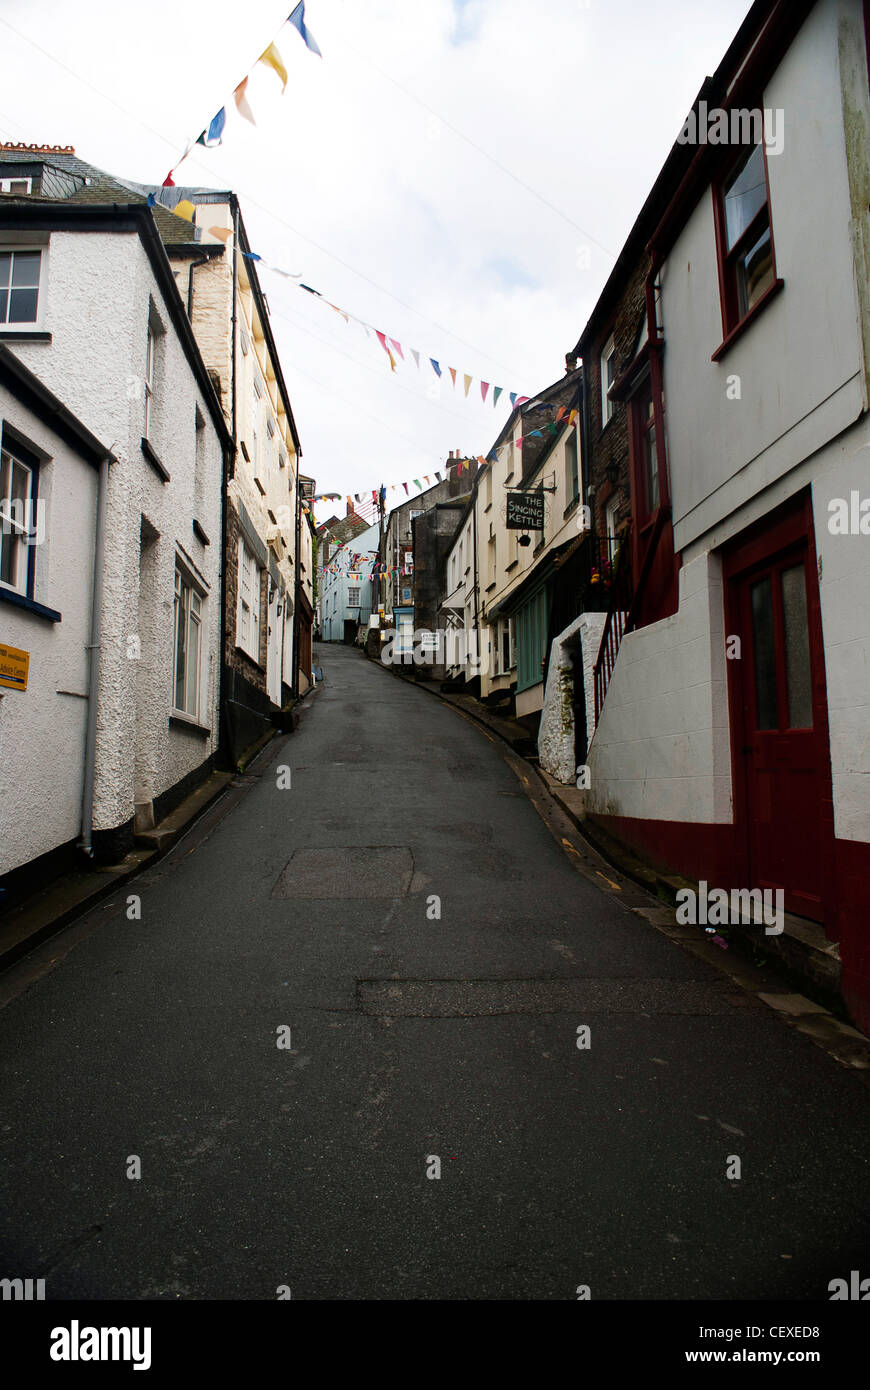 Looking up an old, steep Cornish hill! Stock Photo